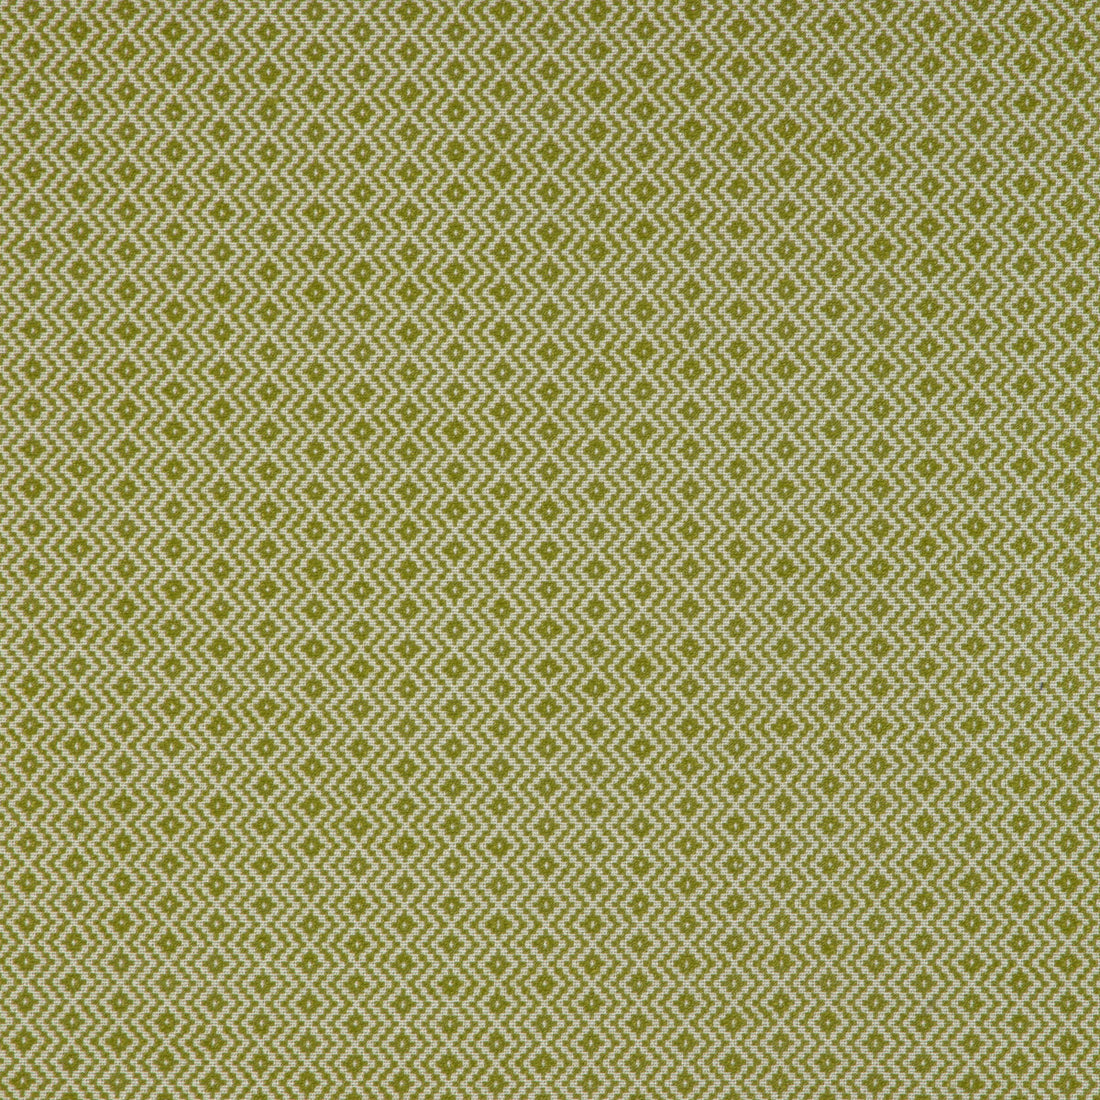 Kravet Design fabric in 36884-3 color - pattern 36884.3.0 - by Kravet Design in the Insideout Seaqual Initiative collection